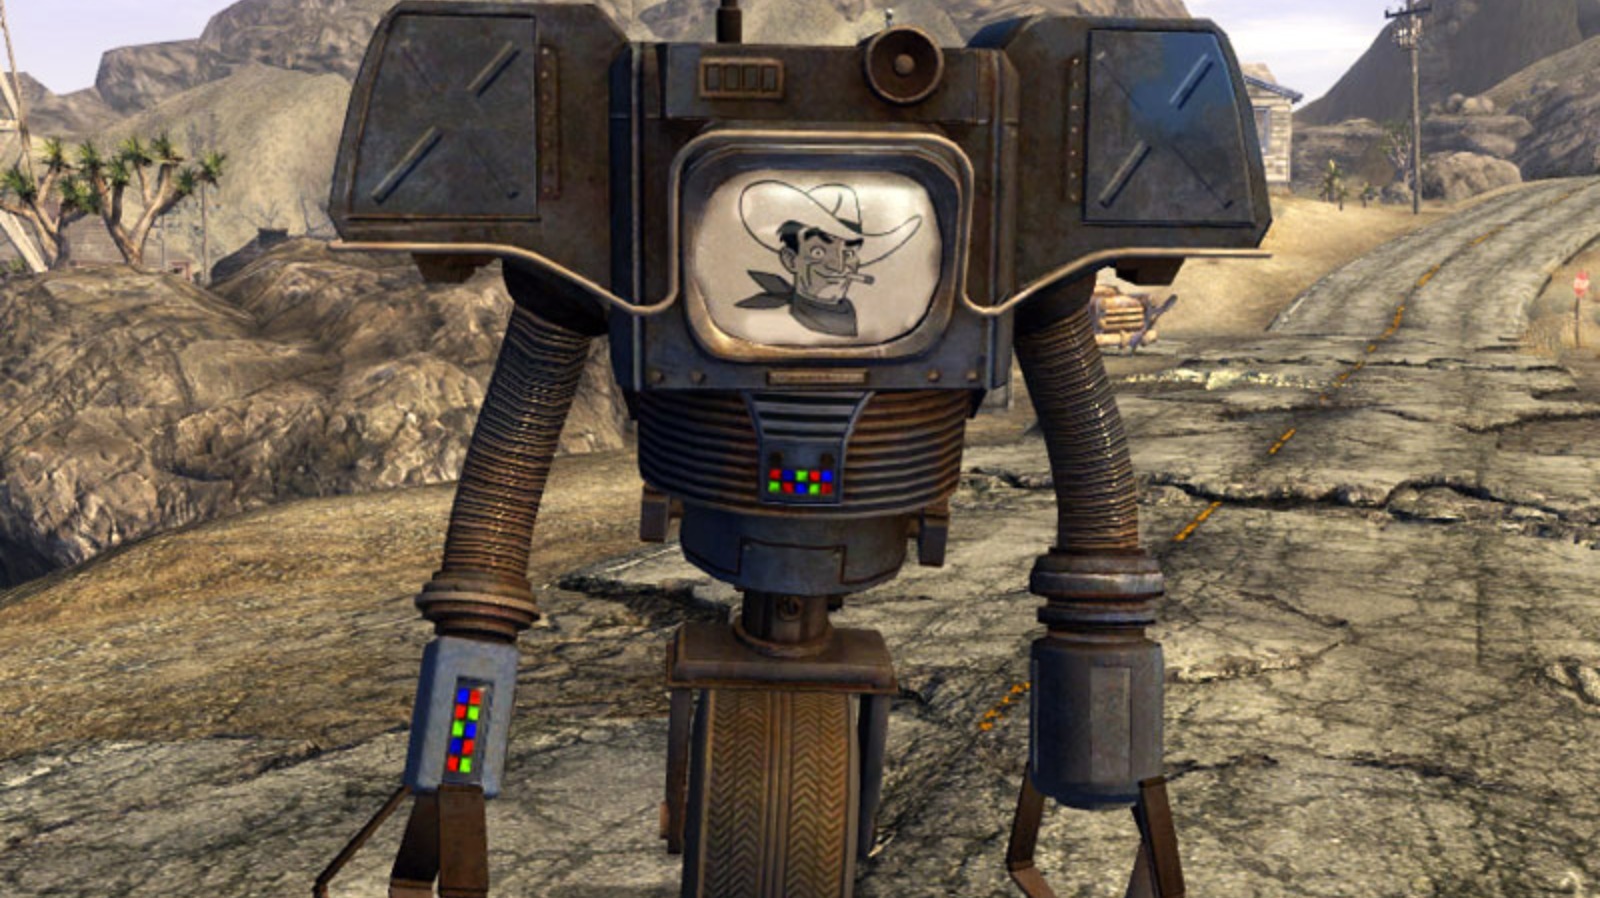 Fallout devs shoot down New Vegas 2 rumors with cheeky message - Dexerto